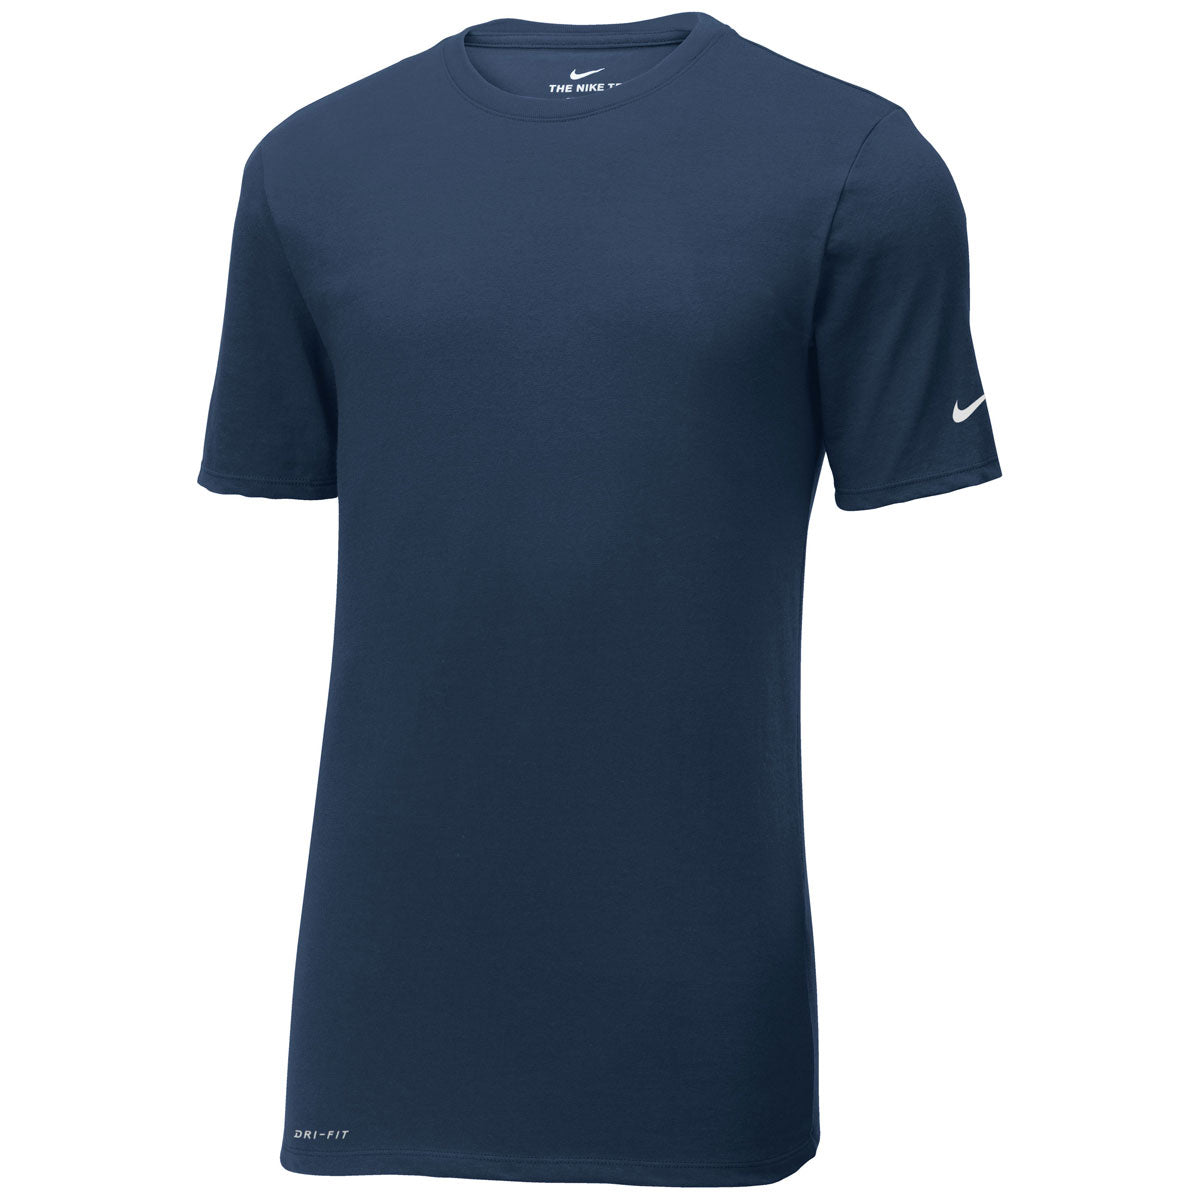 Stylish Navy XL Tee Shirt for Men by Nike